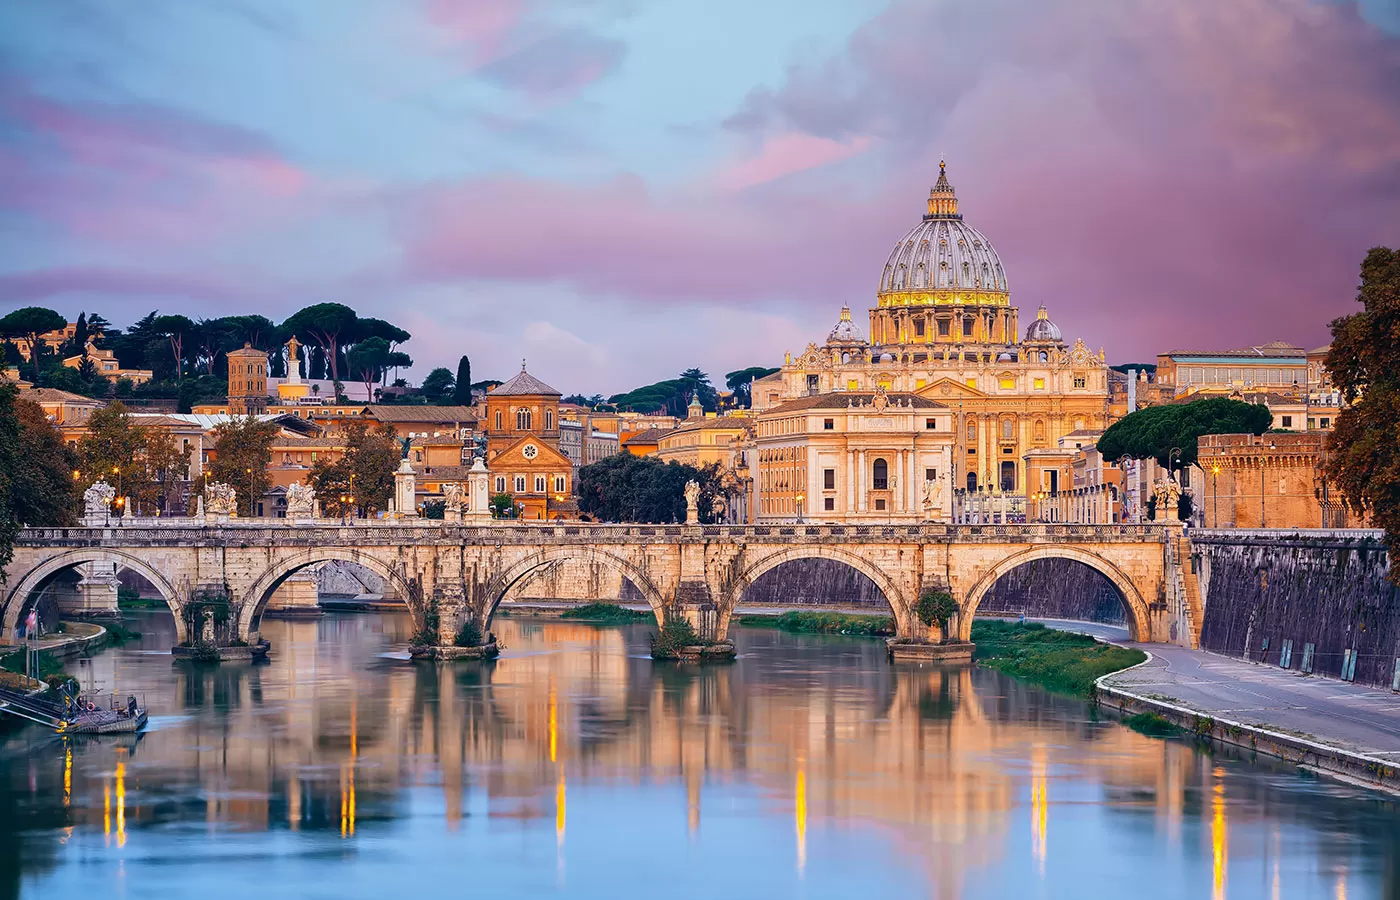 Fun Facts of Italy - Vatican City is the smallest country in the world